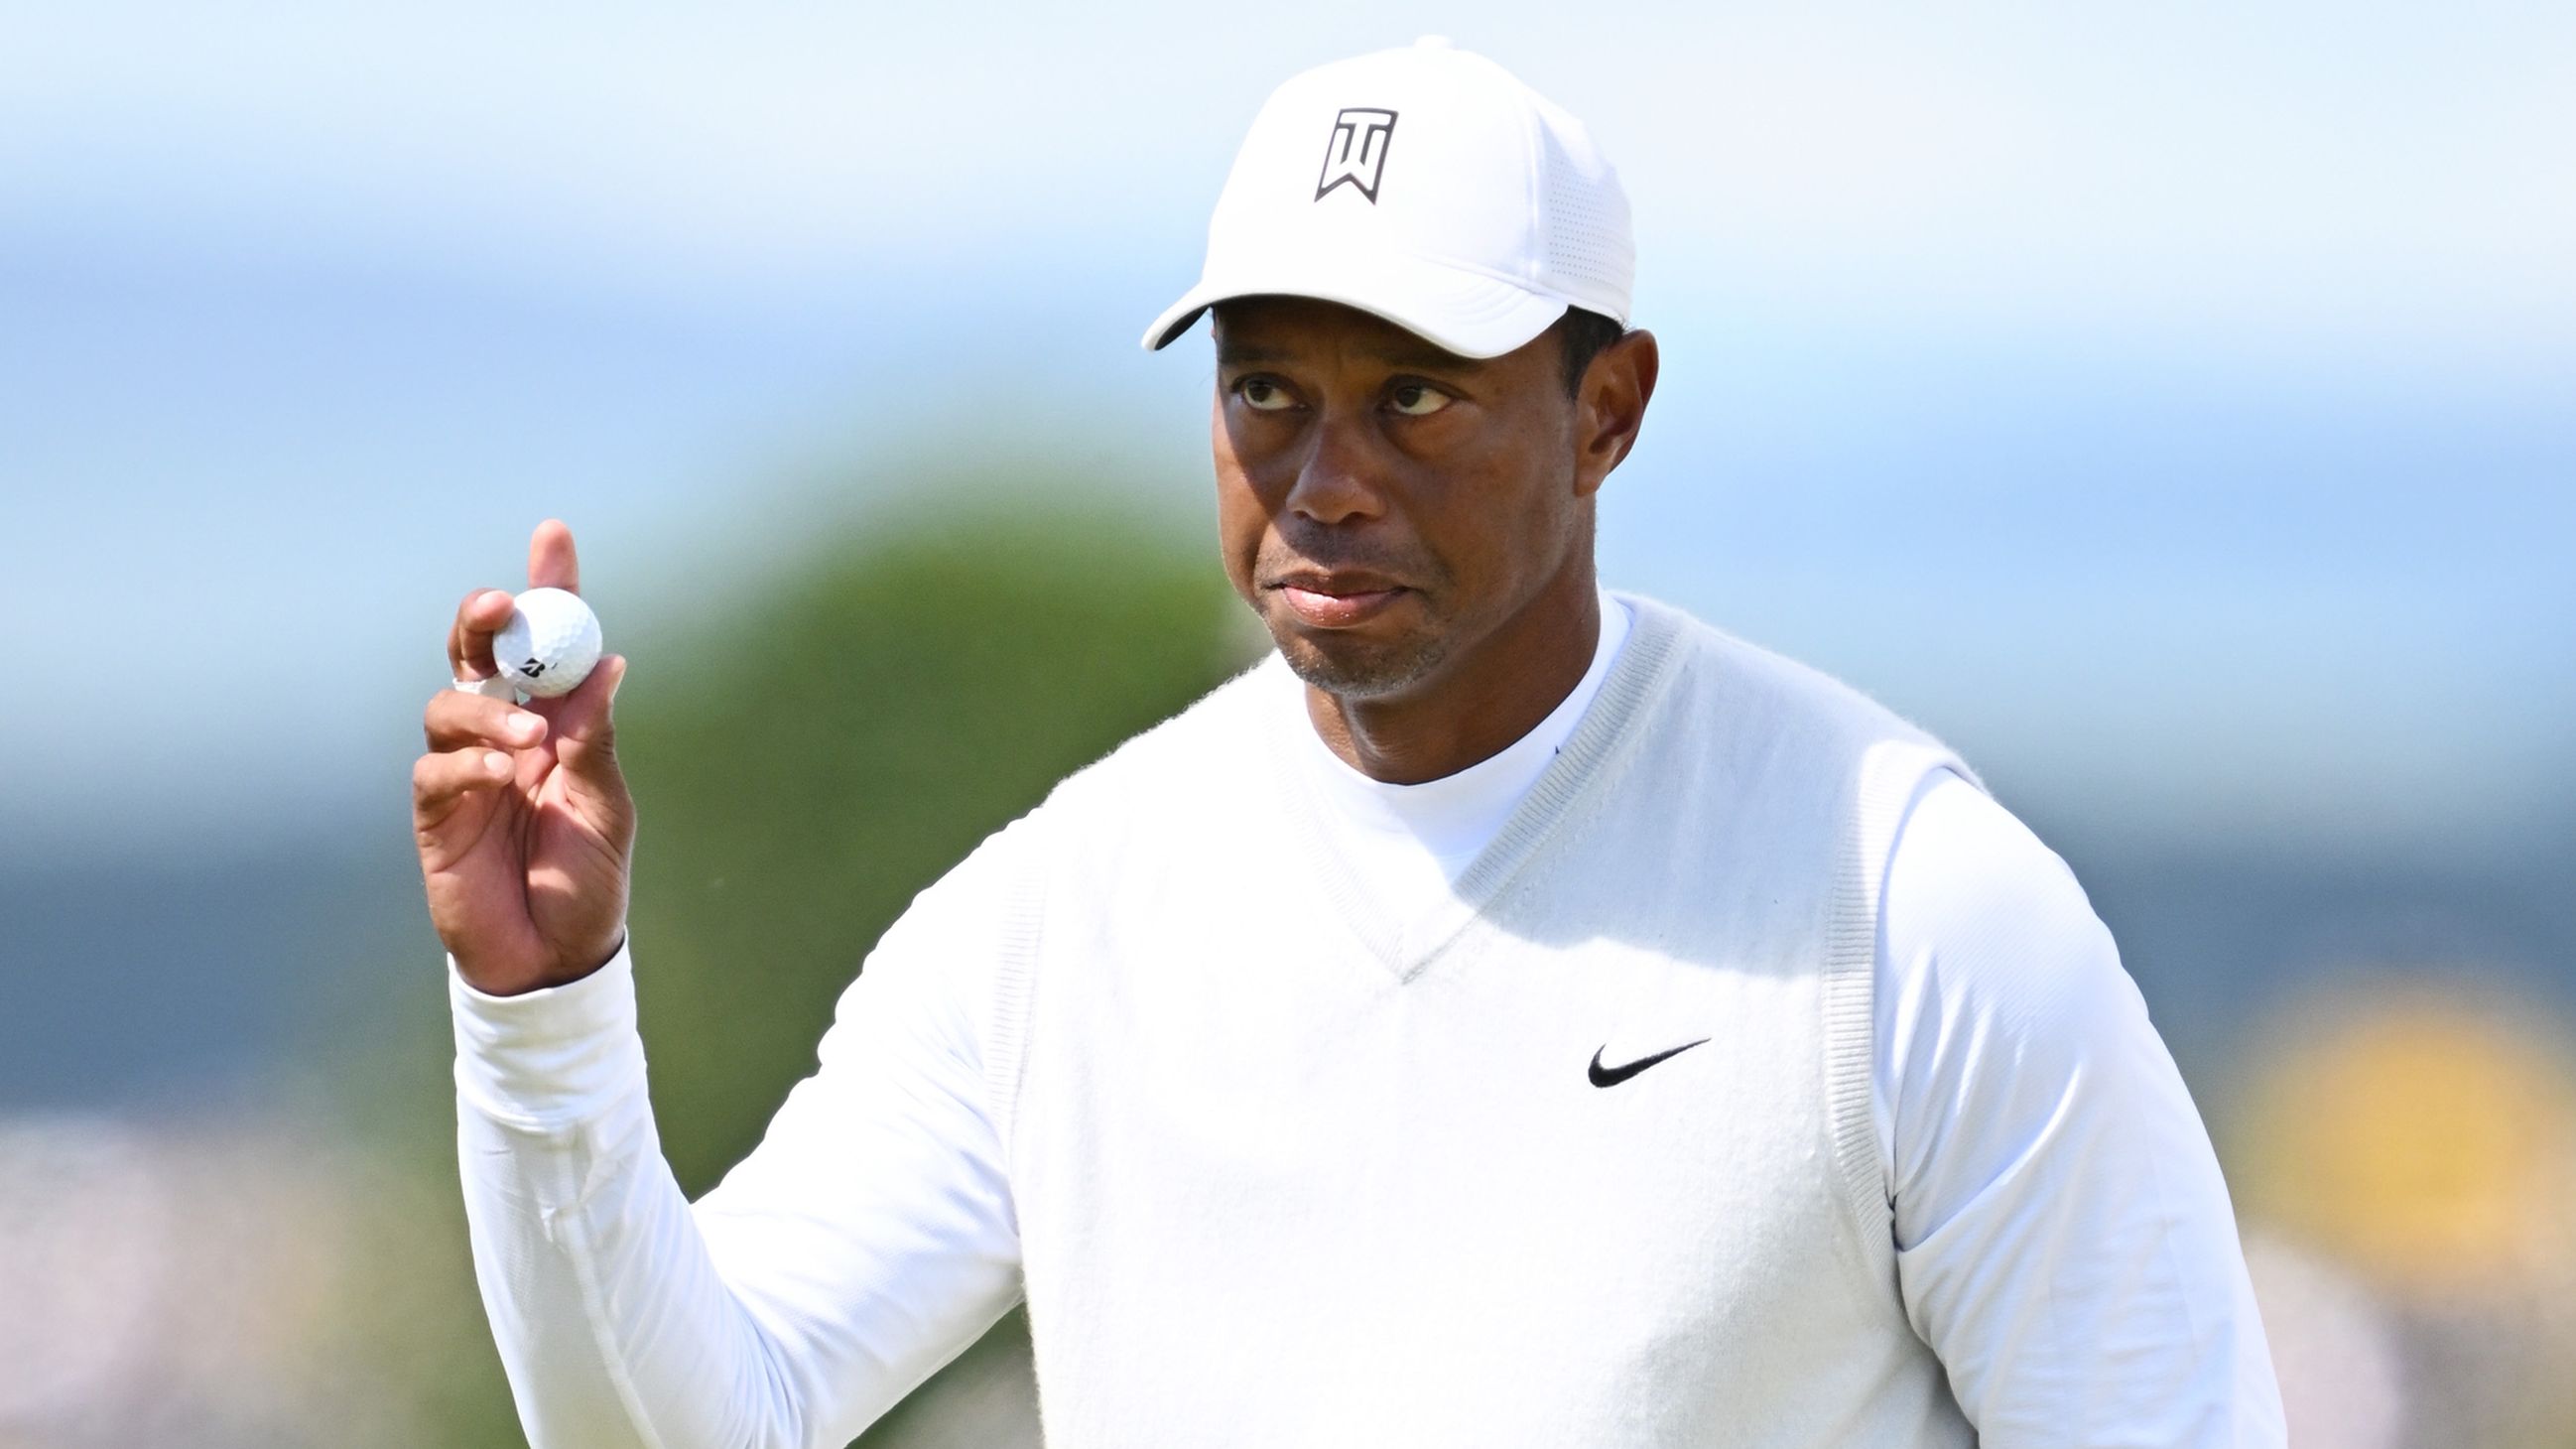 Details emerge from inside the secretive Tiger Woods led player meeting as PGA Tour strikes back